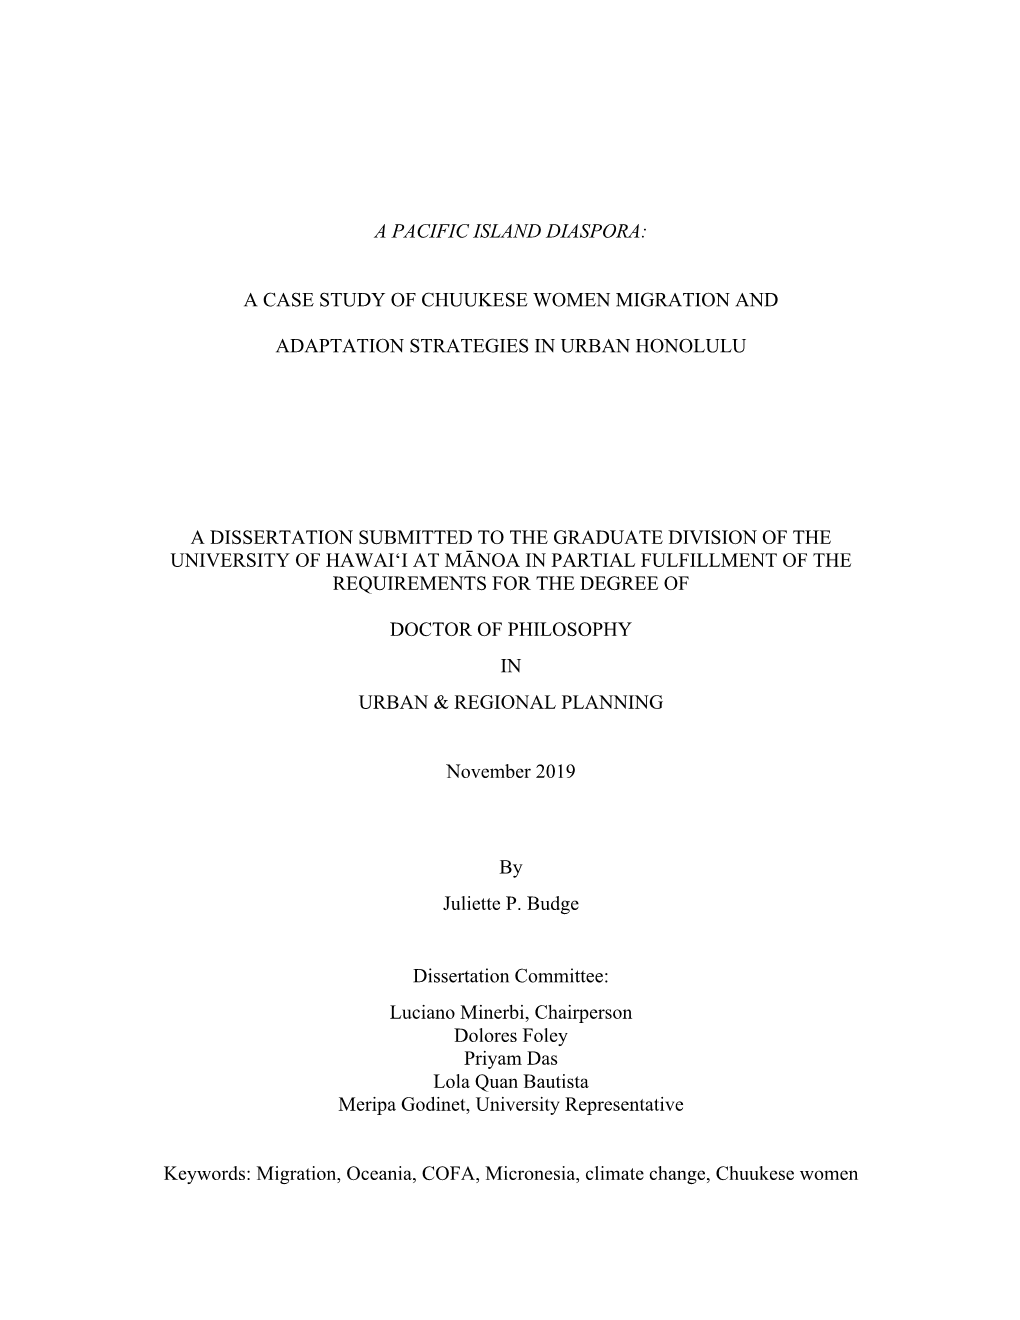 A Pacific Island Diaspora: a Case Study of Chuukese Women Migration and Adaptation Strategies in Urban Honolulu a Dissertation